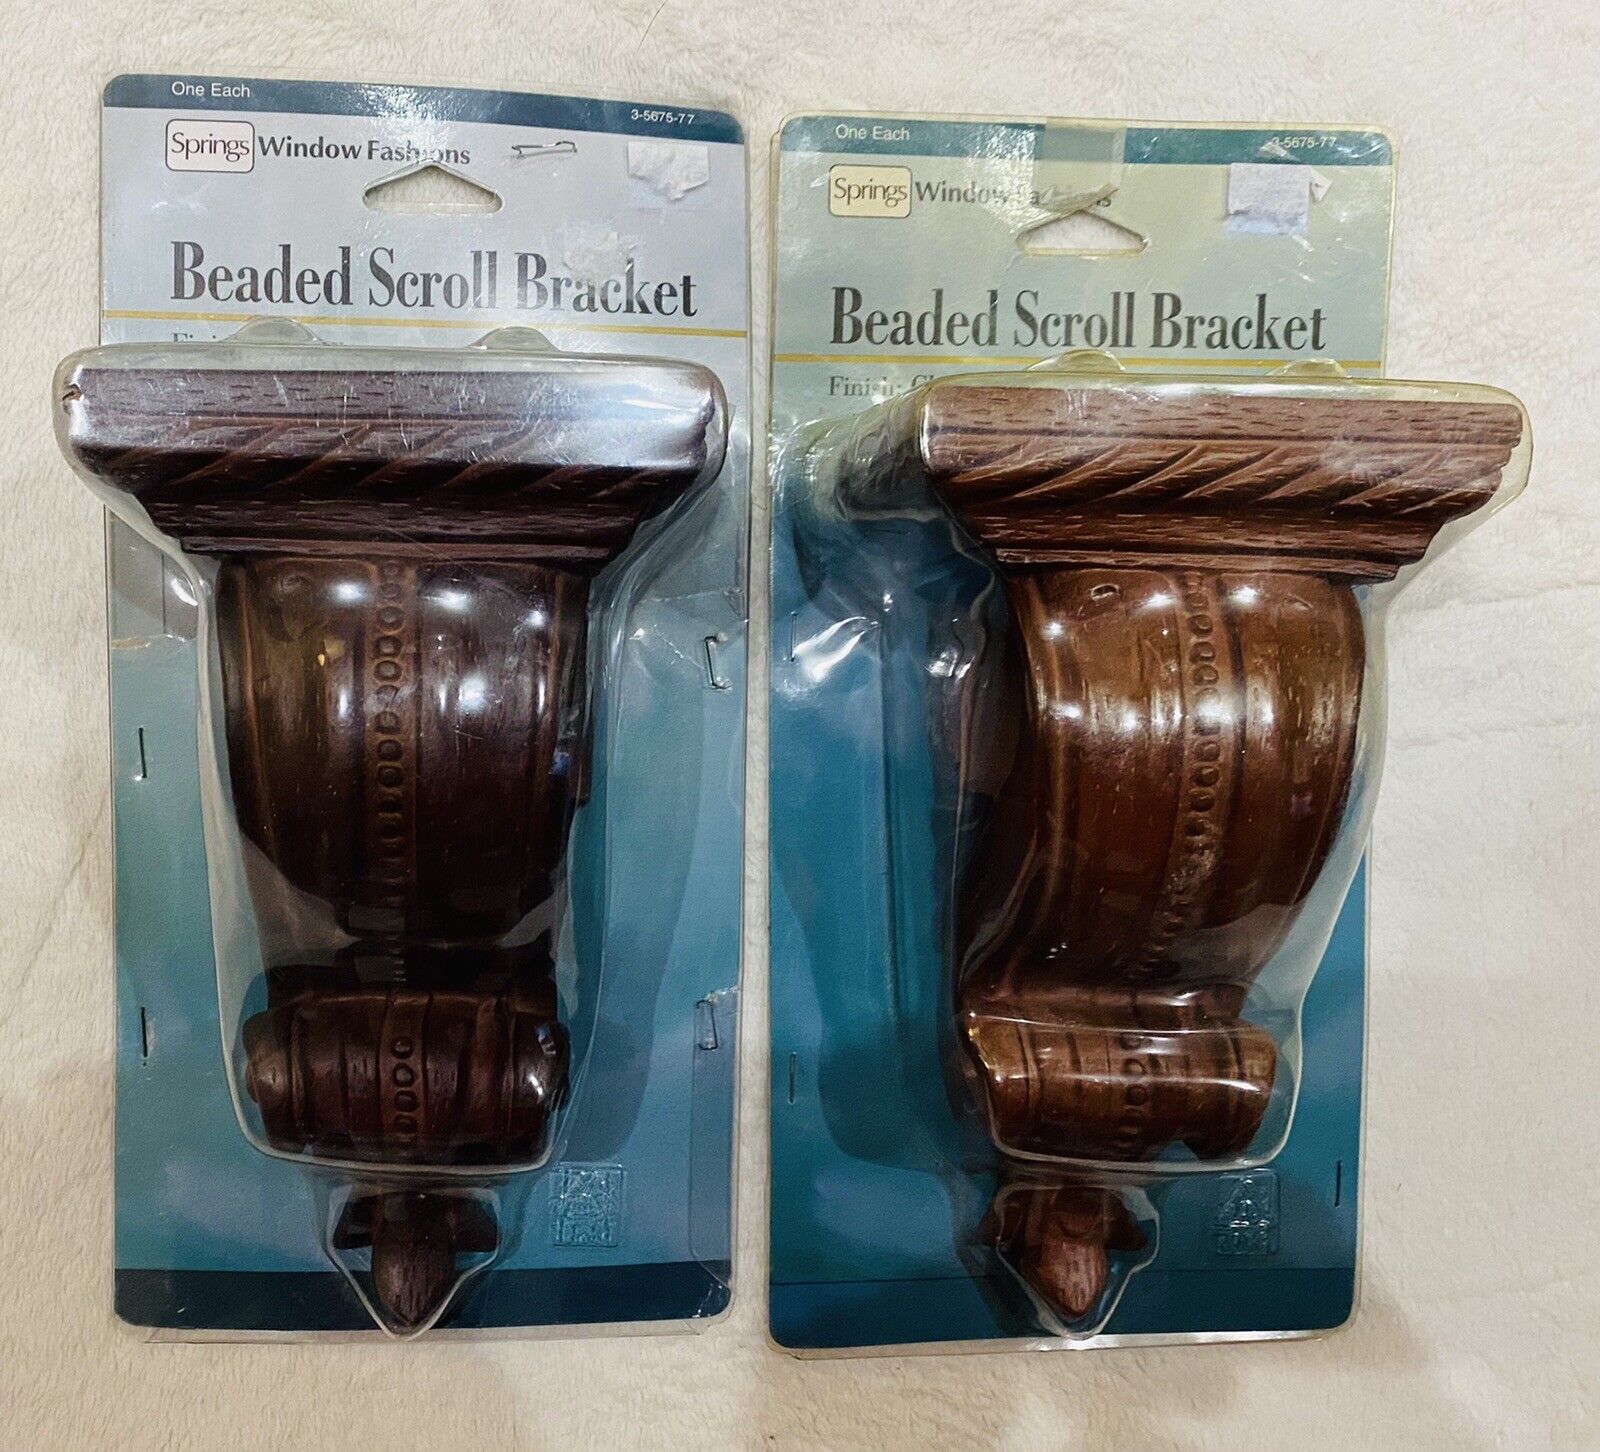 Window Beaded Elegant Scroll Bracket Bro Our shop OFFers the best service Springs Cherry Fashion